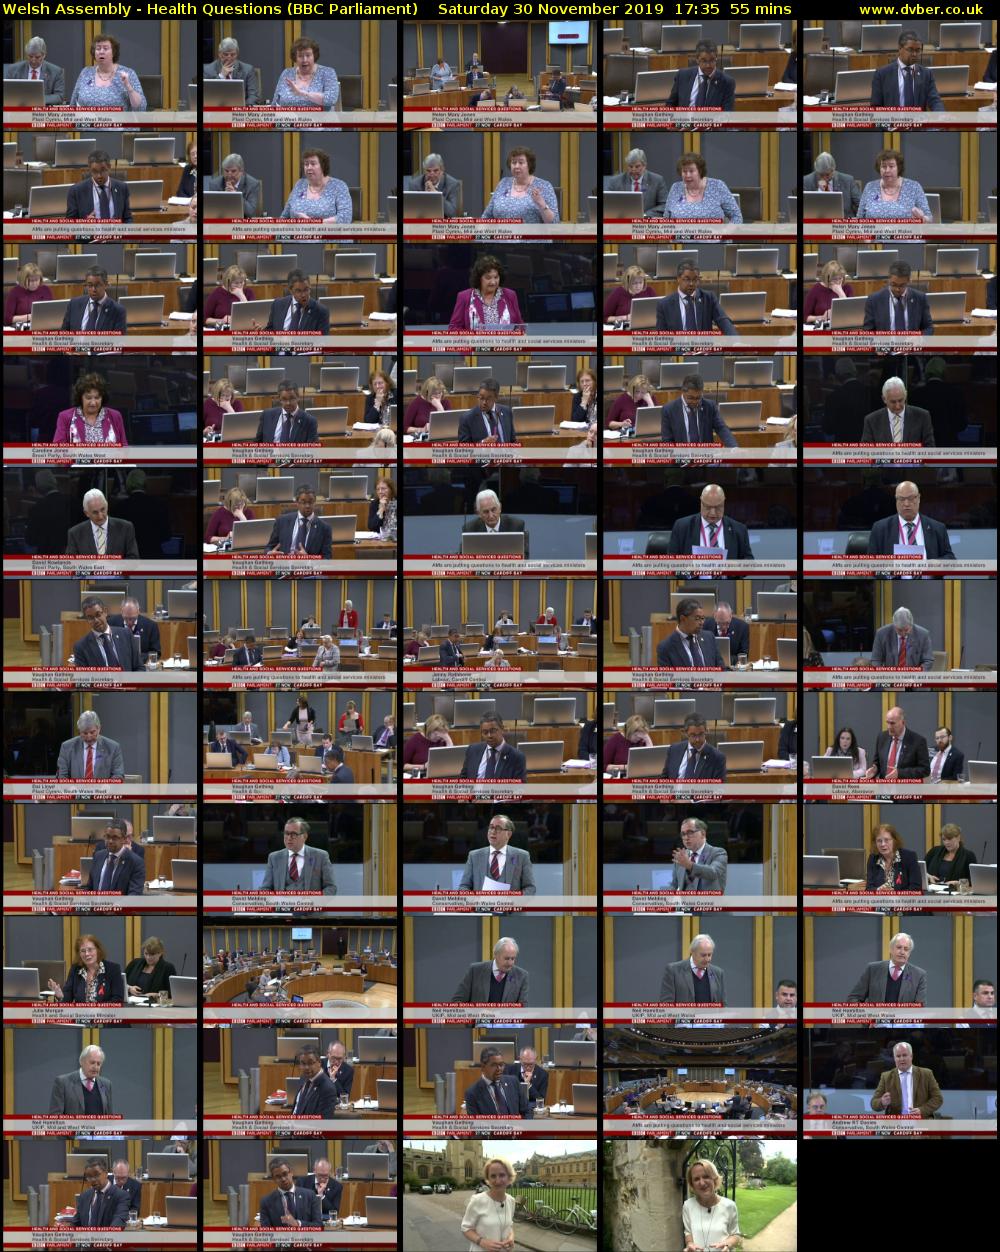 Welsh Assembly - Health Questions (BBC Parliament) Saturday 30 November 2019 17:35 - 18:30